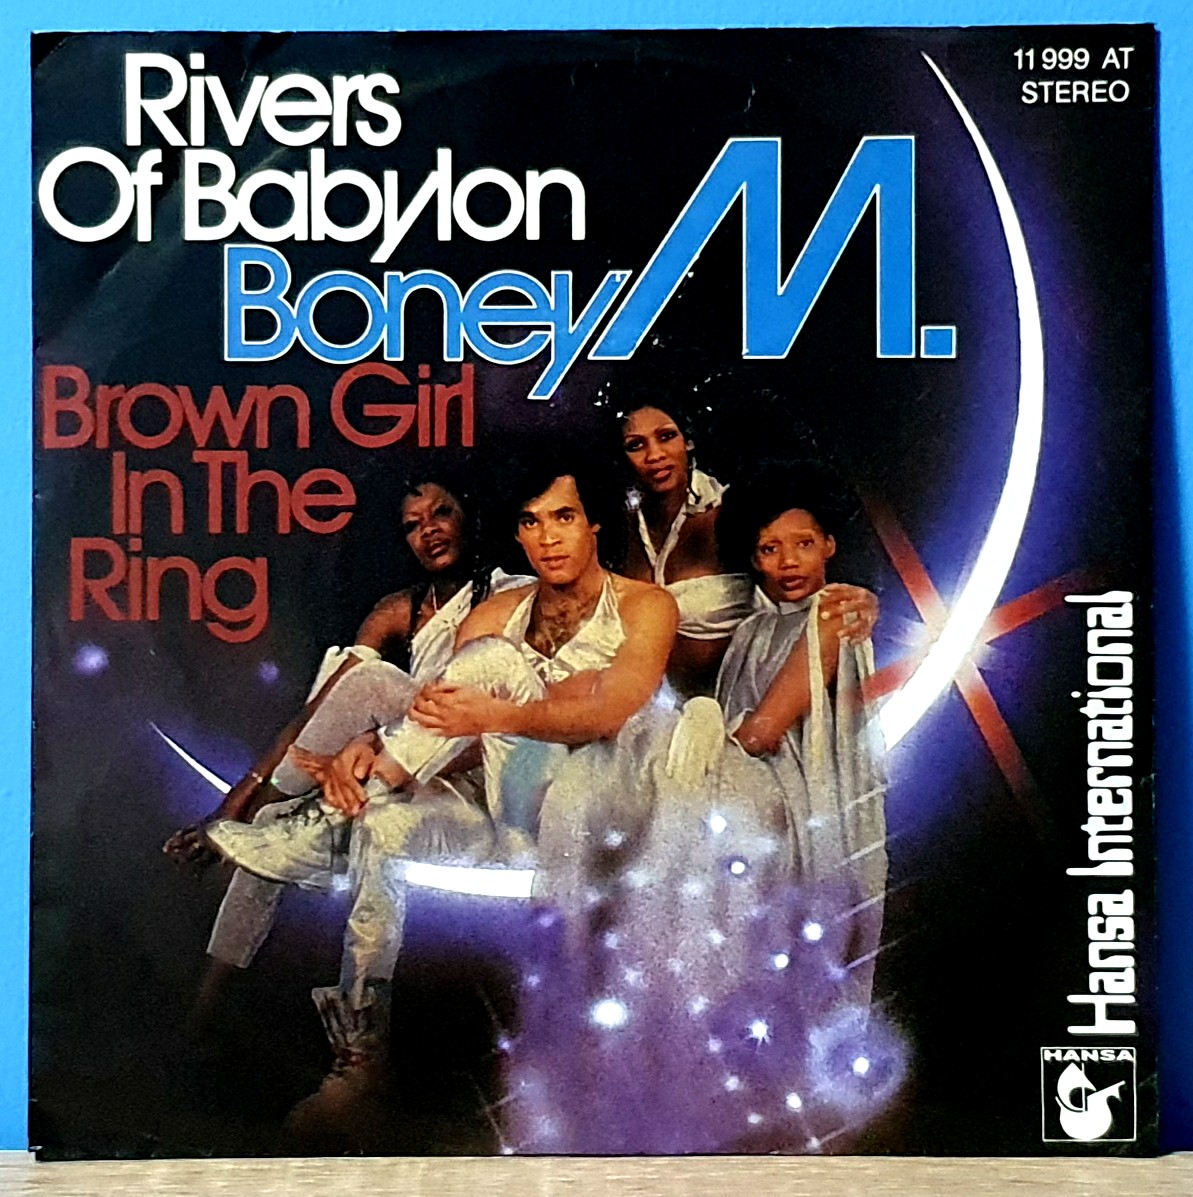 Brown Girl in the Ring - LIVE - song and lyrics by Boney M. | Spotify